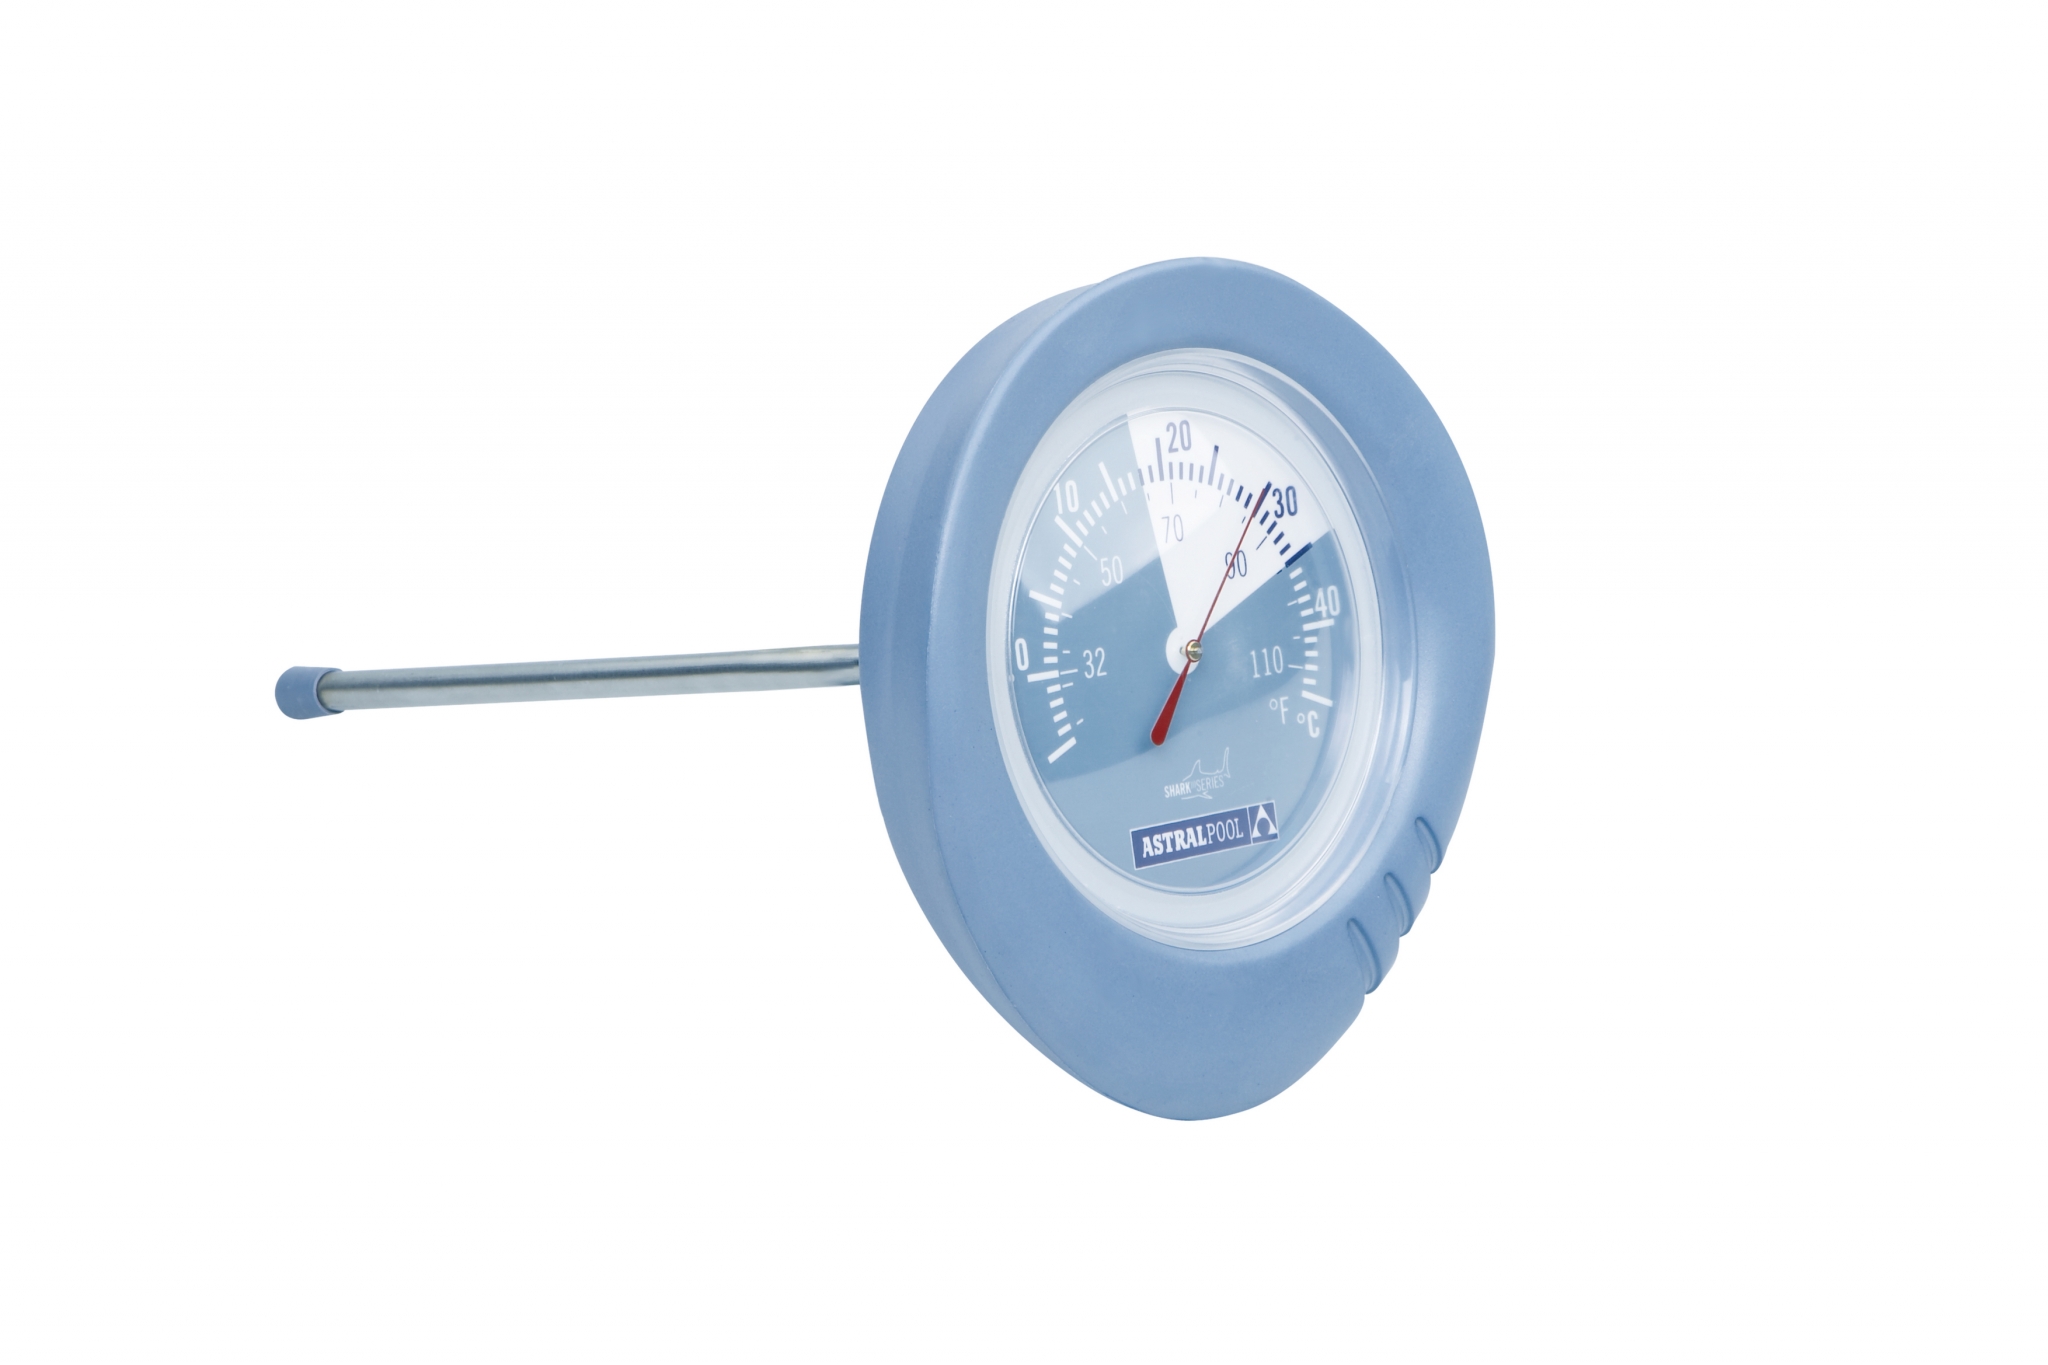 SHARK THERMOMETER ZWEMBAD MADE IN EU